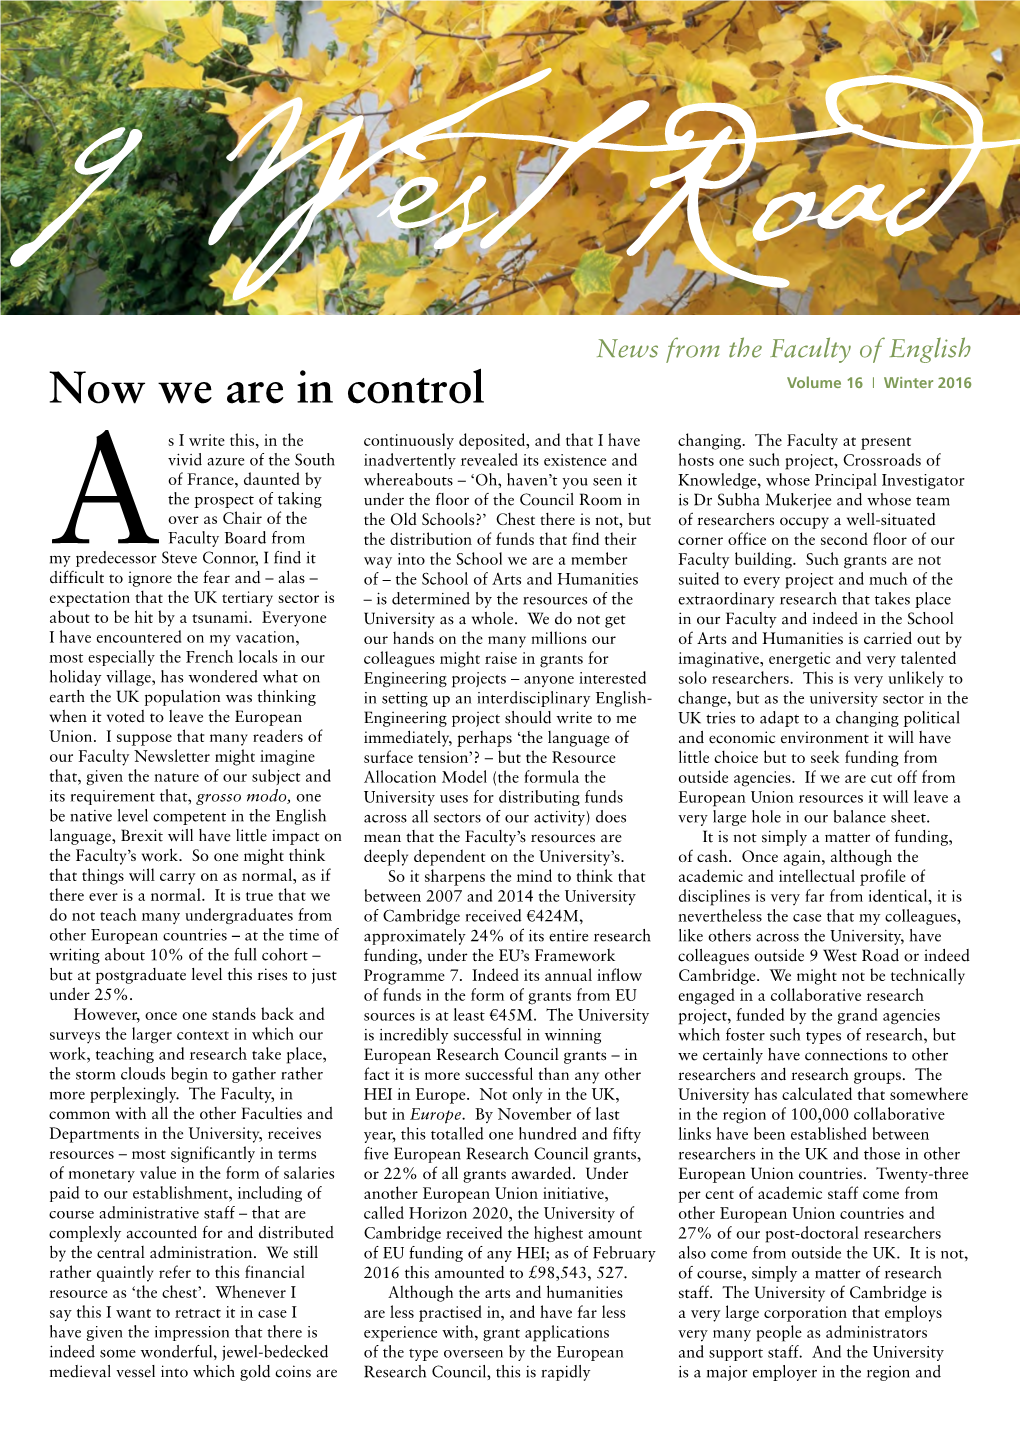 Now We Are in Control Volume 16 I Winter 2016